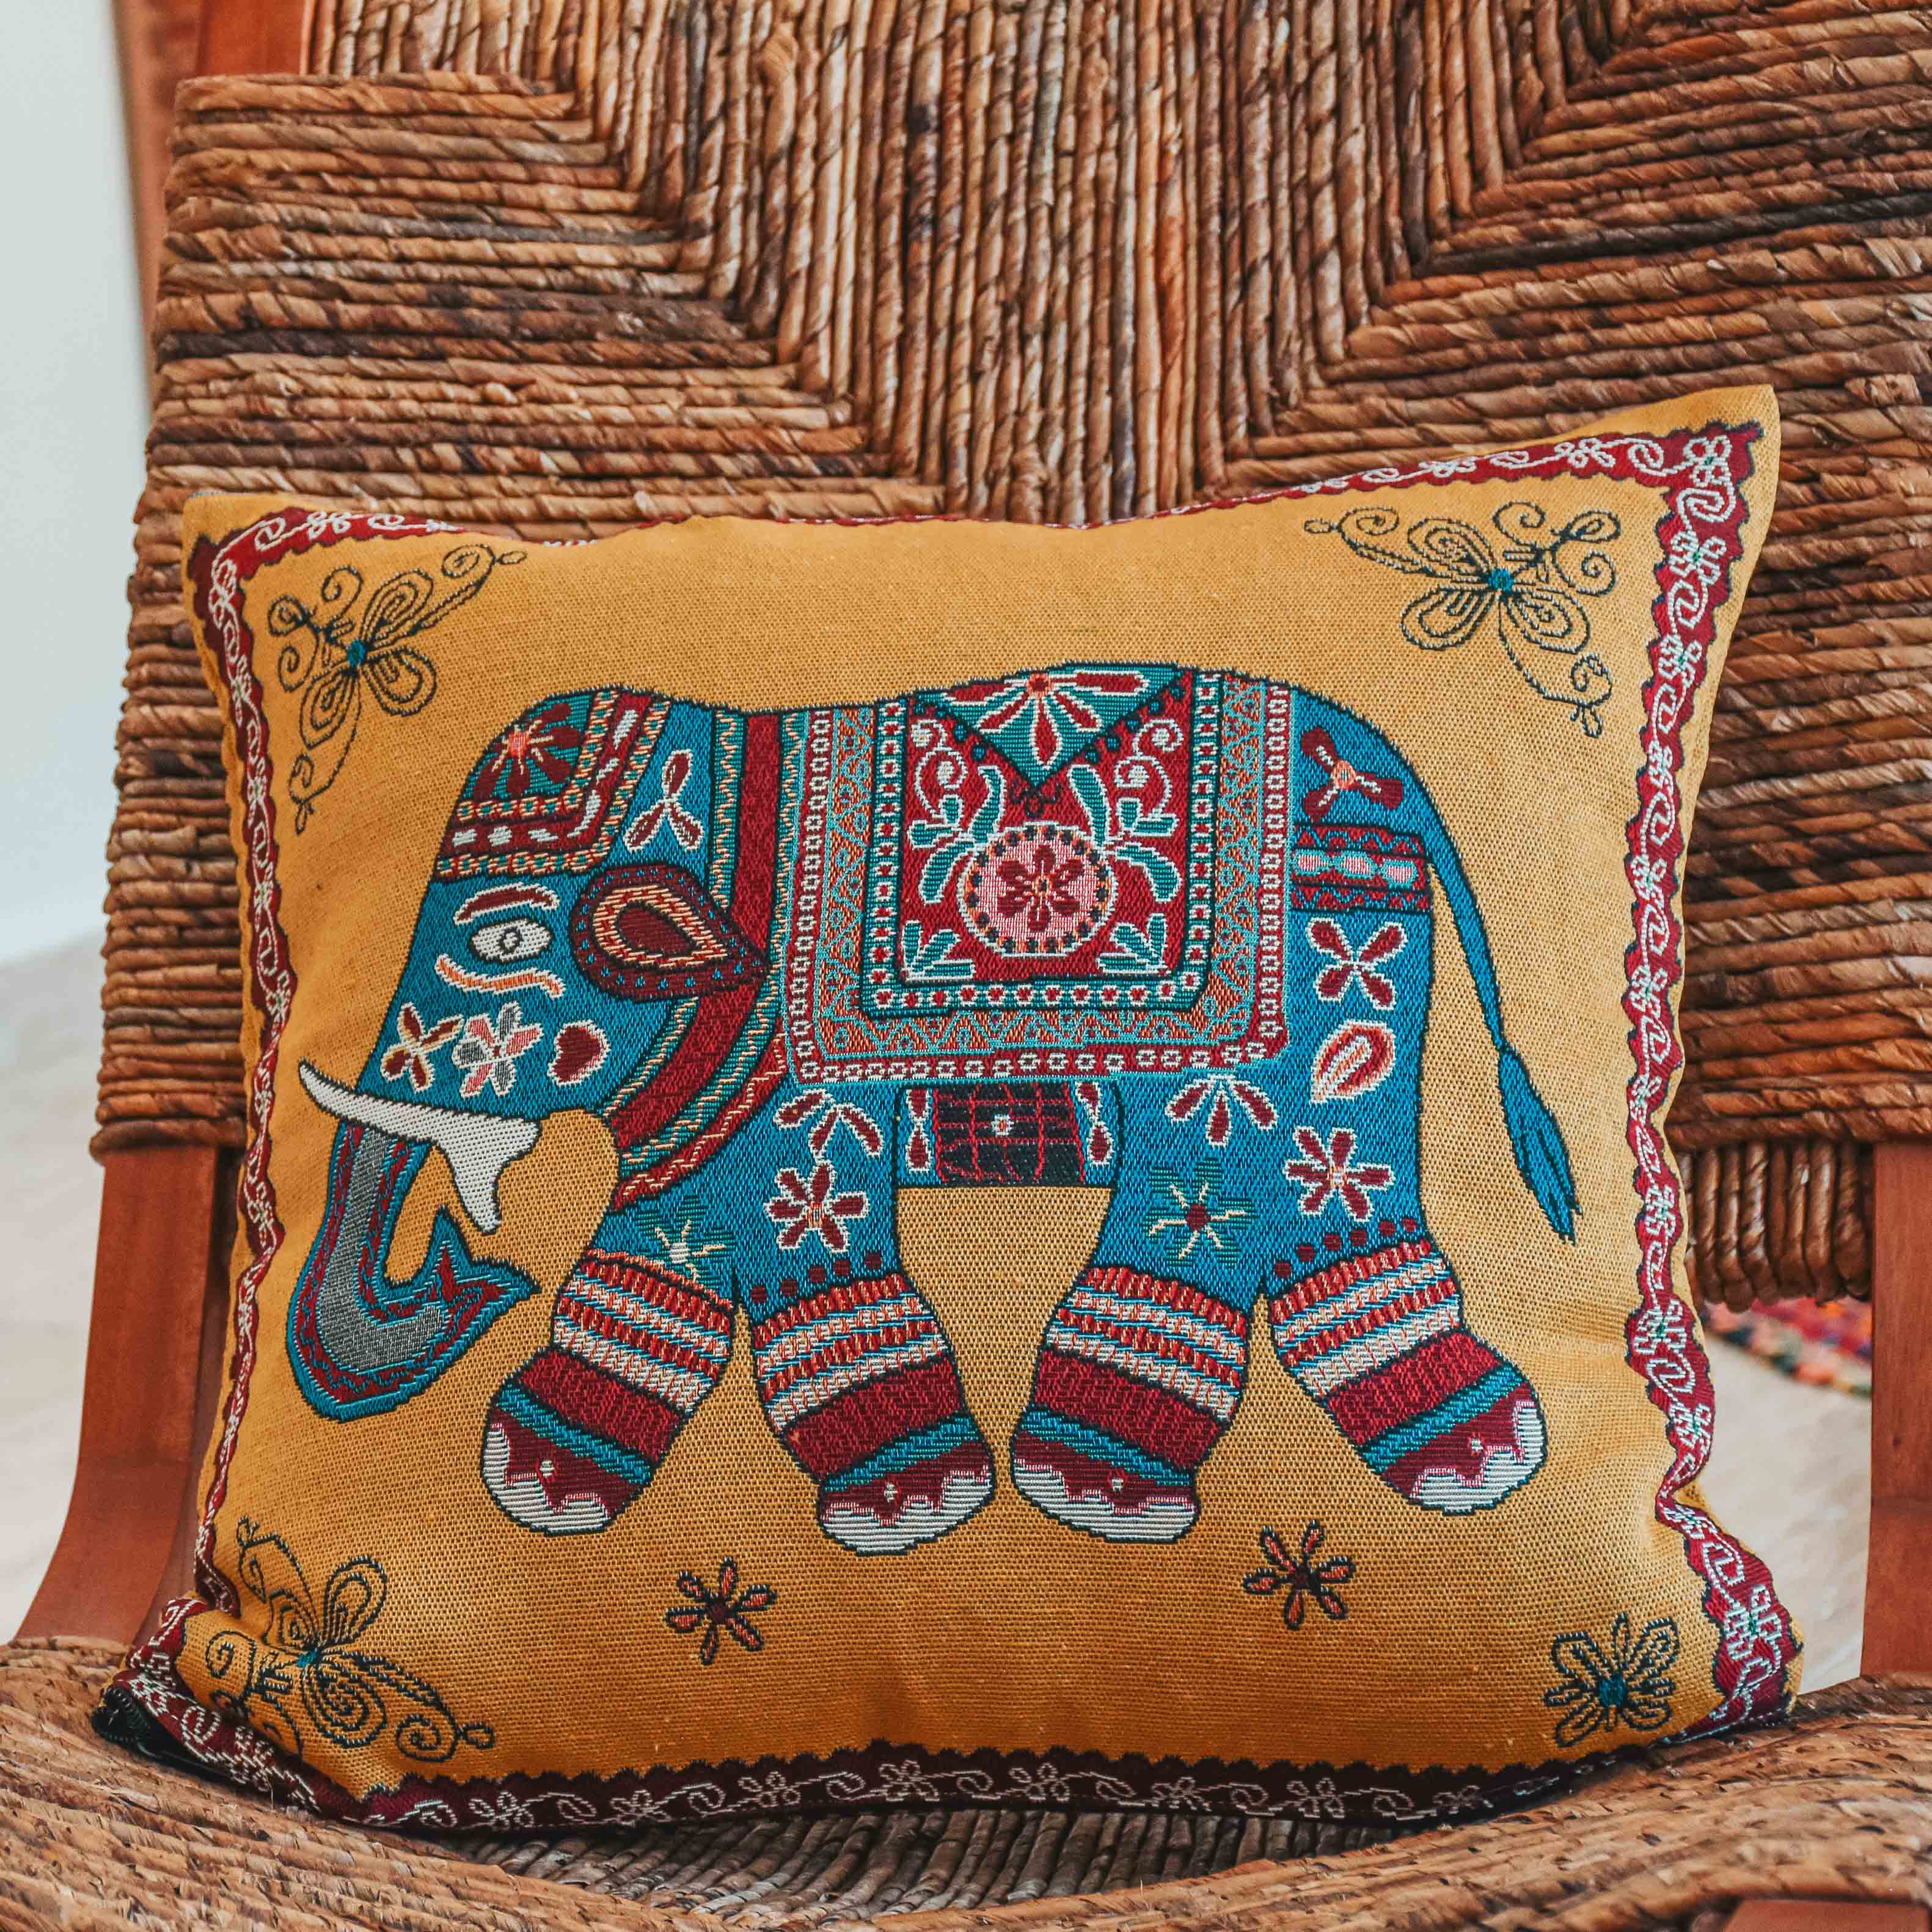 IBRA PILLOW COVER Elepanta Pillows - Buy Today Elephant Pants Jewelry And Bohemian Clothes Handmade In Thailand Help To Save The Elephants FairTrade And Vegan